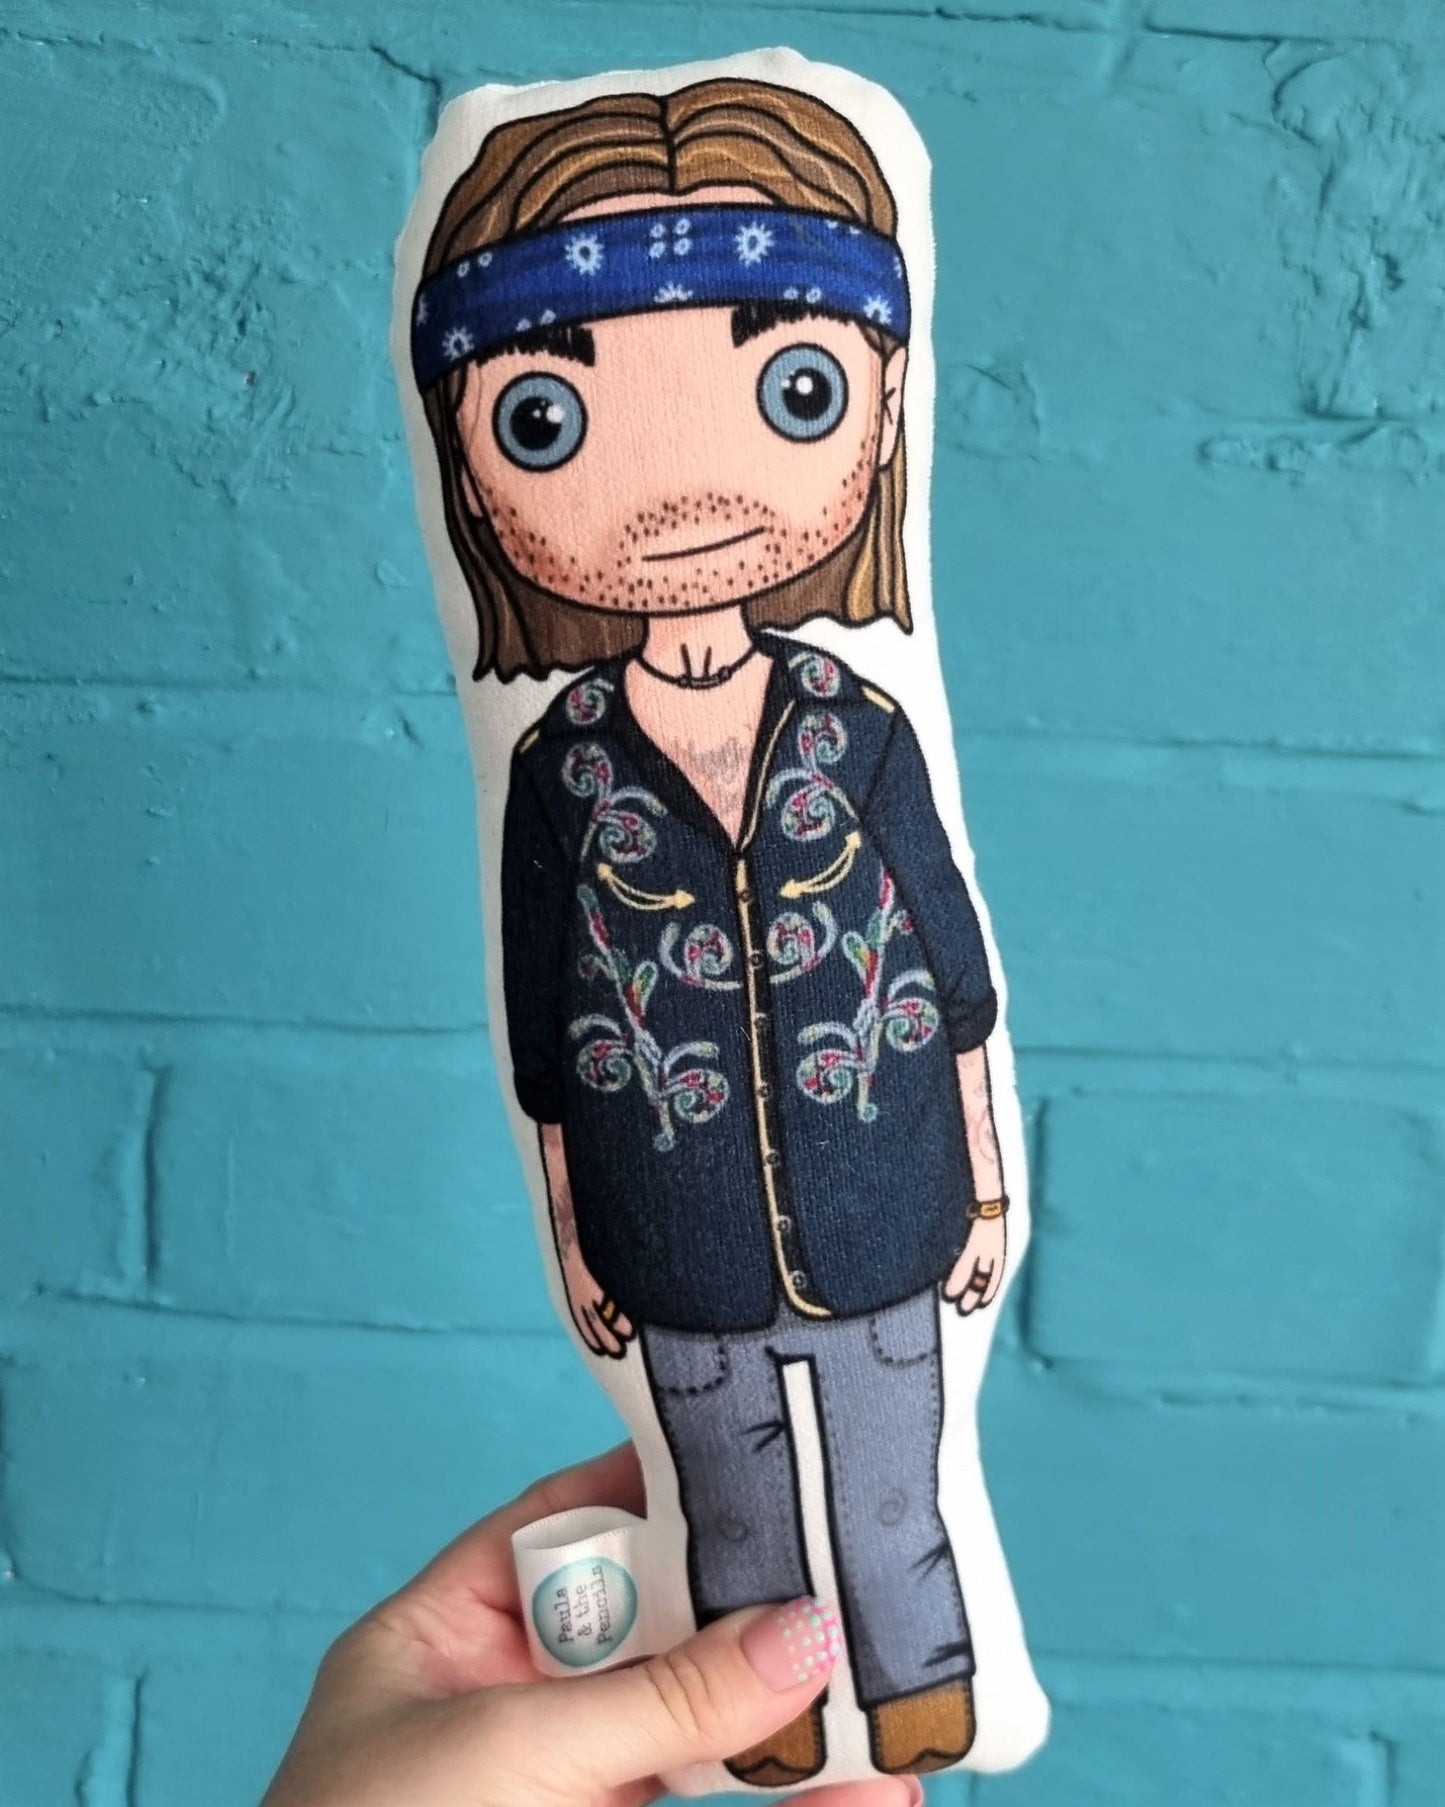 Foo Fighters Inspired Fabric Dolls